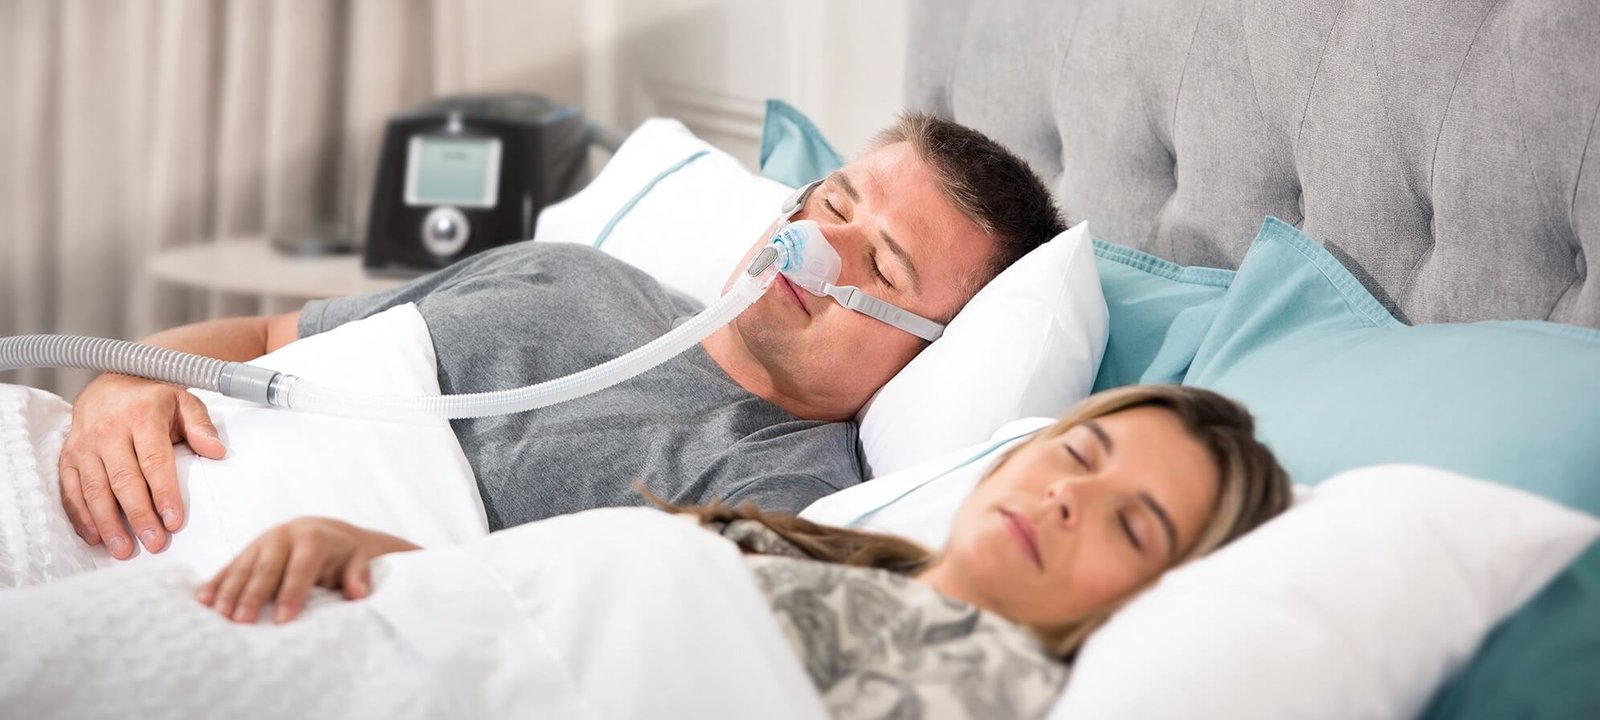 Enjoy Peaceful Night Sleep With Cpap Supplies – Find Out How!